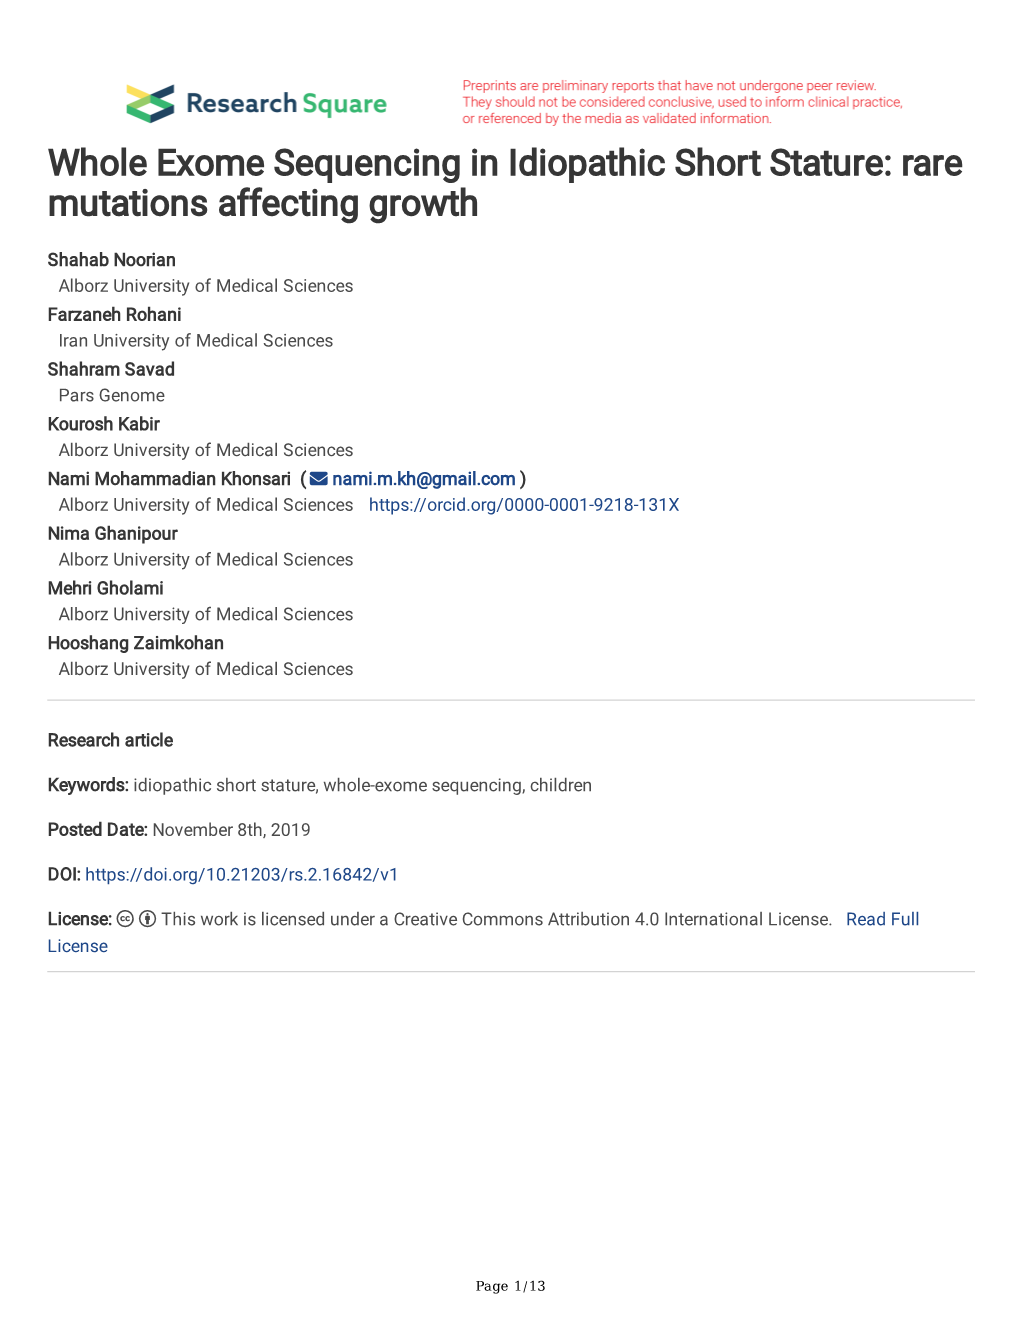 Whole Exome Sequencing in Idiopathic Short Stature: Rare Mutations Affecting Growth